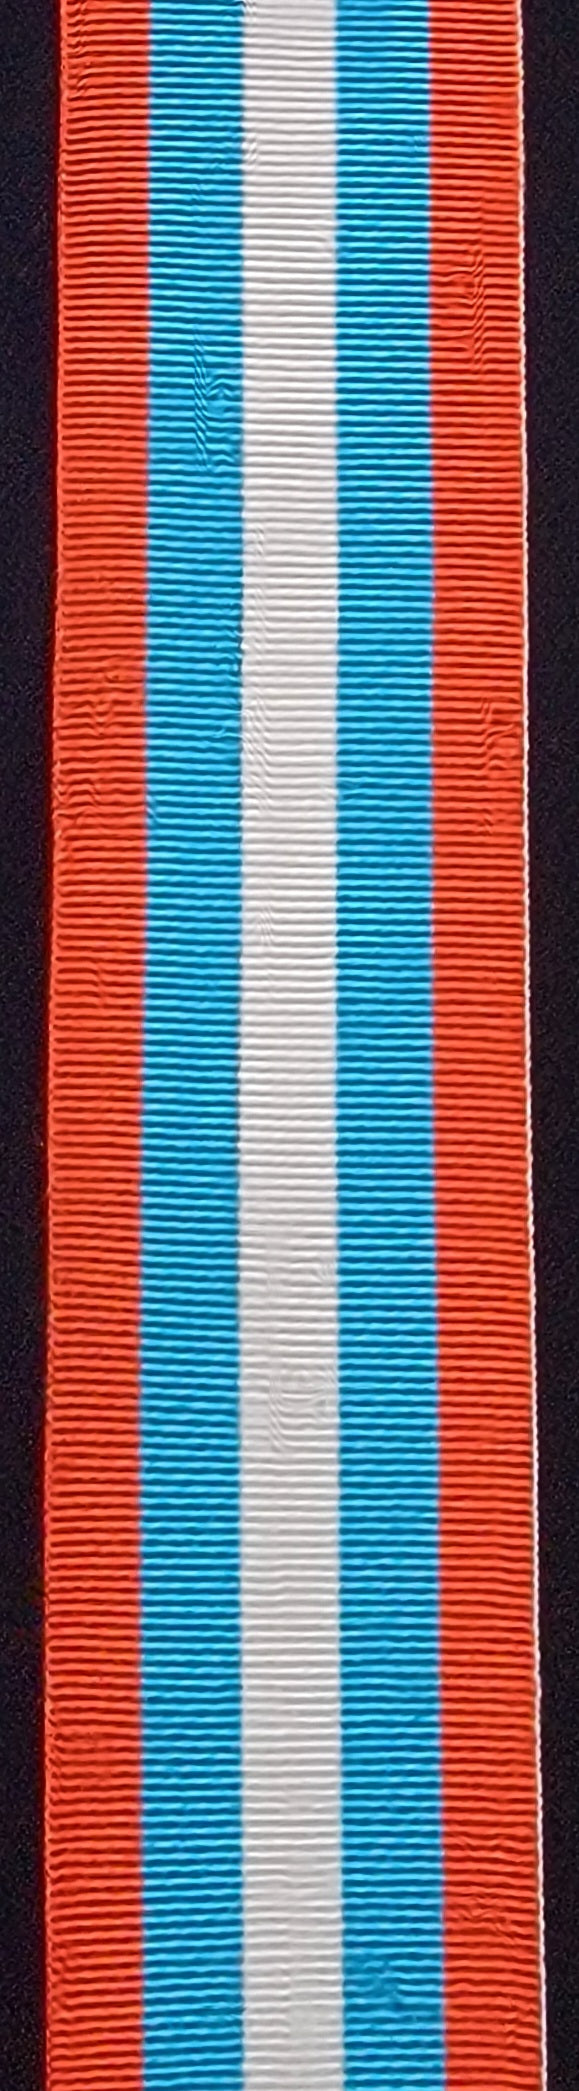 Ribbon, Fort McMurray Fire Commemoration Medal